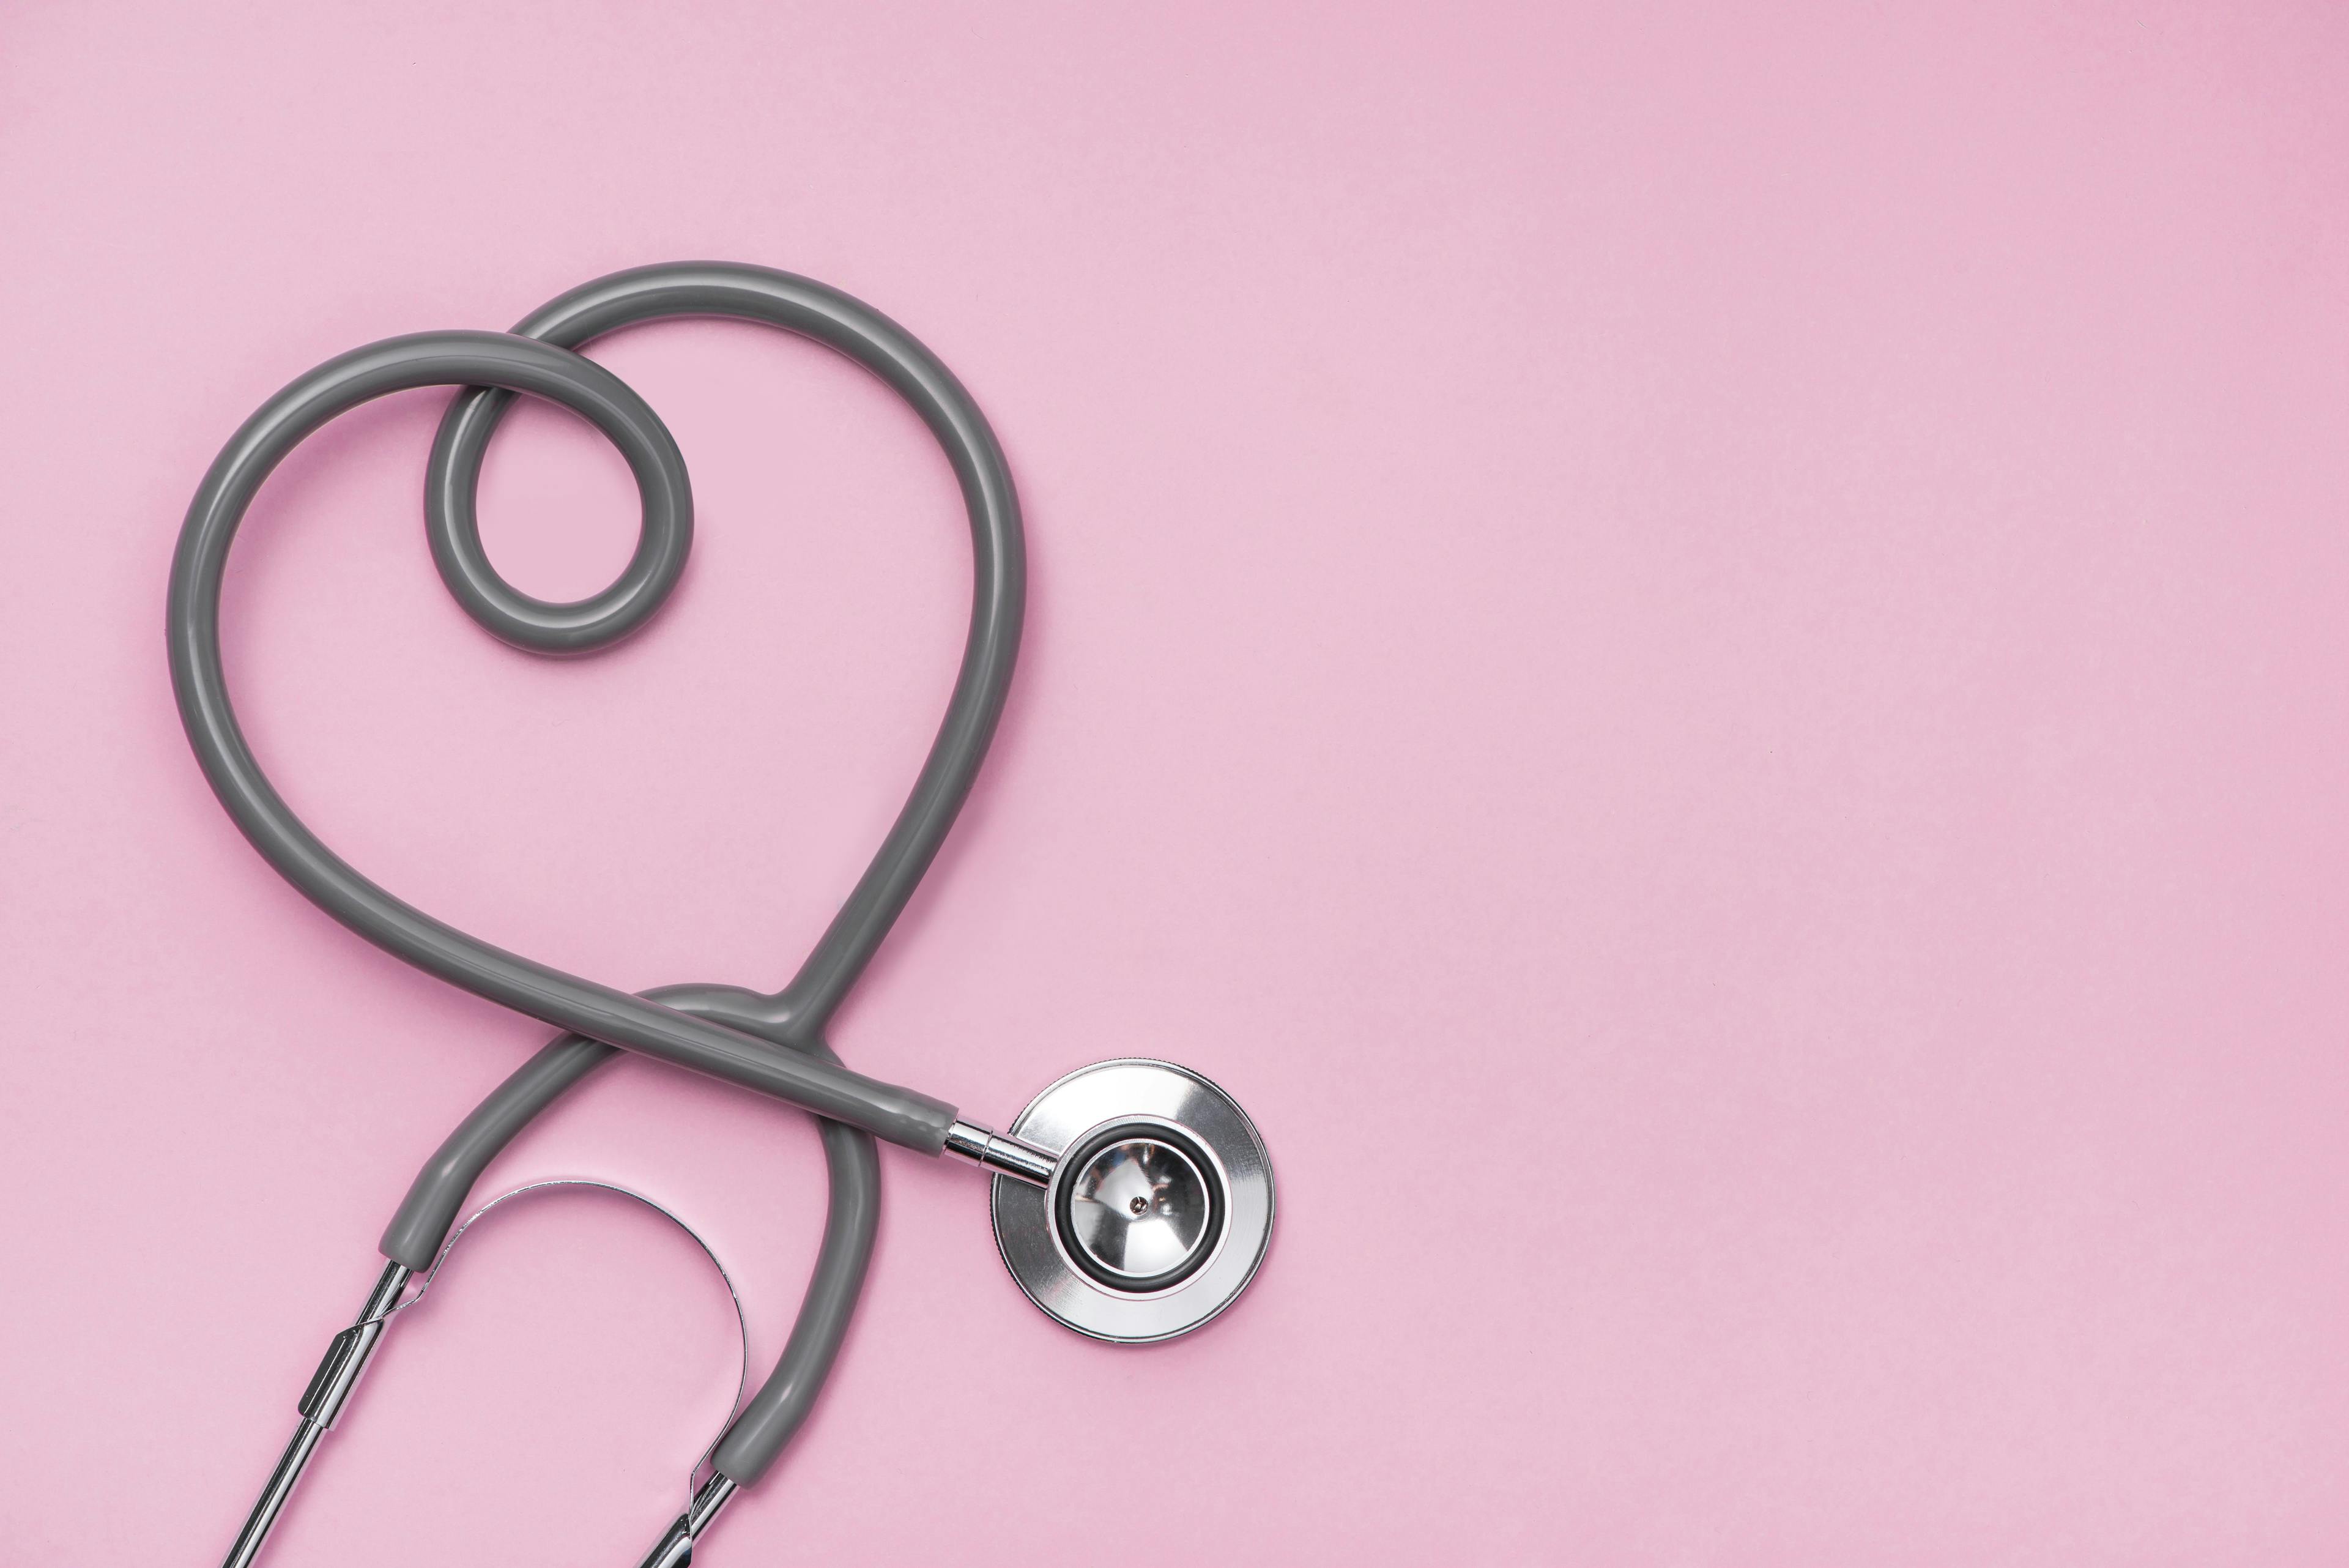 Stethoscope with heart shape on pink background | makistock - stock.adobe.cpm